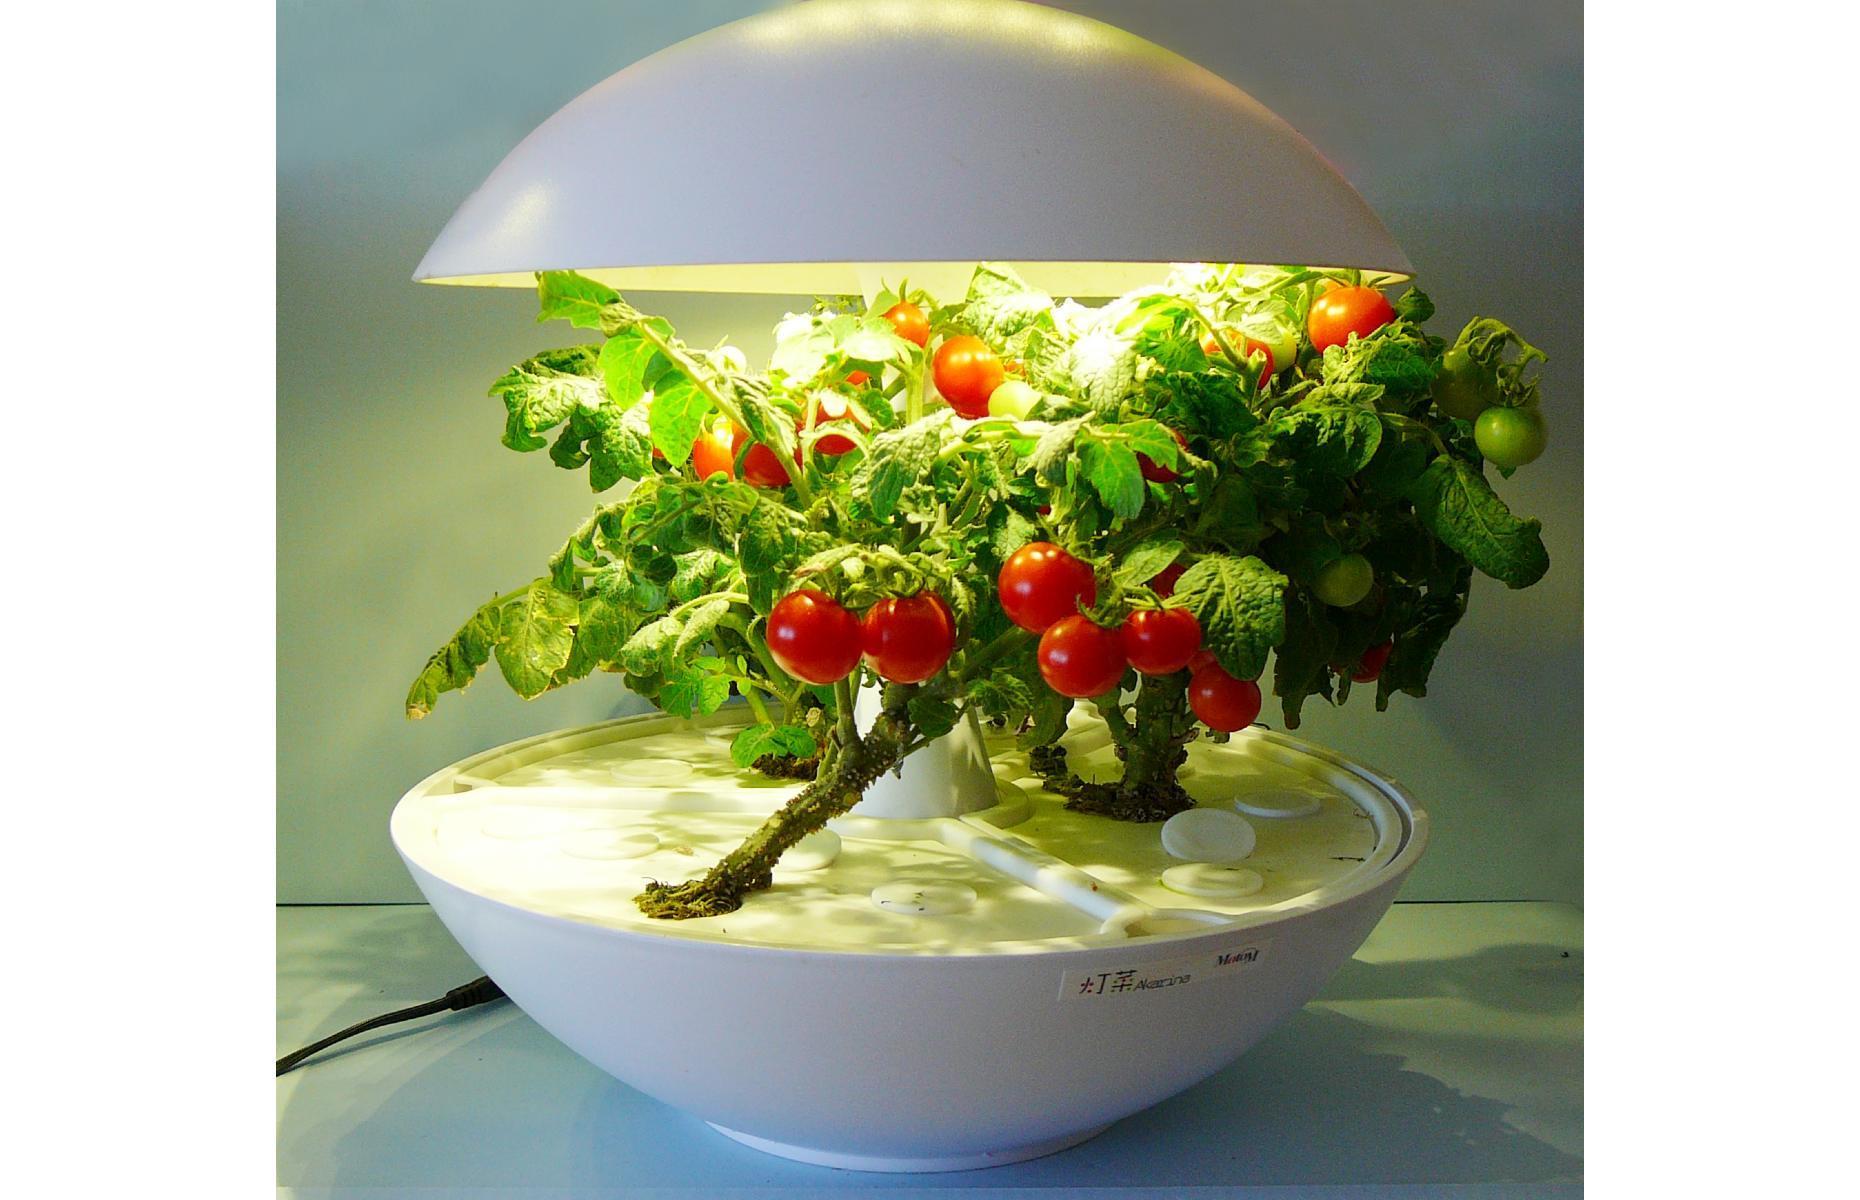 <p>If you really can’t face all that digging and getting your hands dirty but want freshly grown herbs and tomatoes on hand, you might consider one of the impressive <a href="https://www.loveproperty.com/galleries/80545/growyourown-inventions-that-can-feed-your-family?page=1">hydroponic systems</a> currently on the market, which require only water, light and oxygen, along with smart technology, to produce a wide range of produce in urban spaces. Super easy to use and stylish in design, you can have your greens at the flick of a switch…</p>